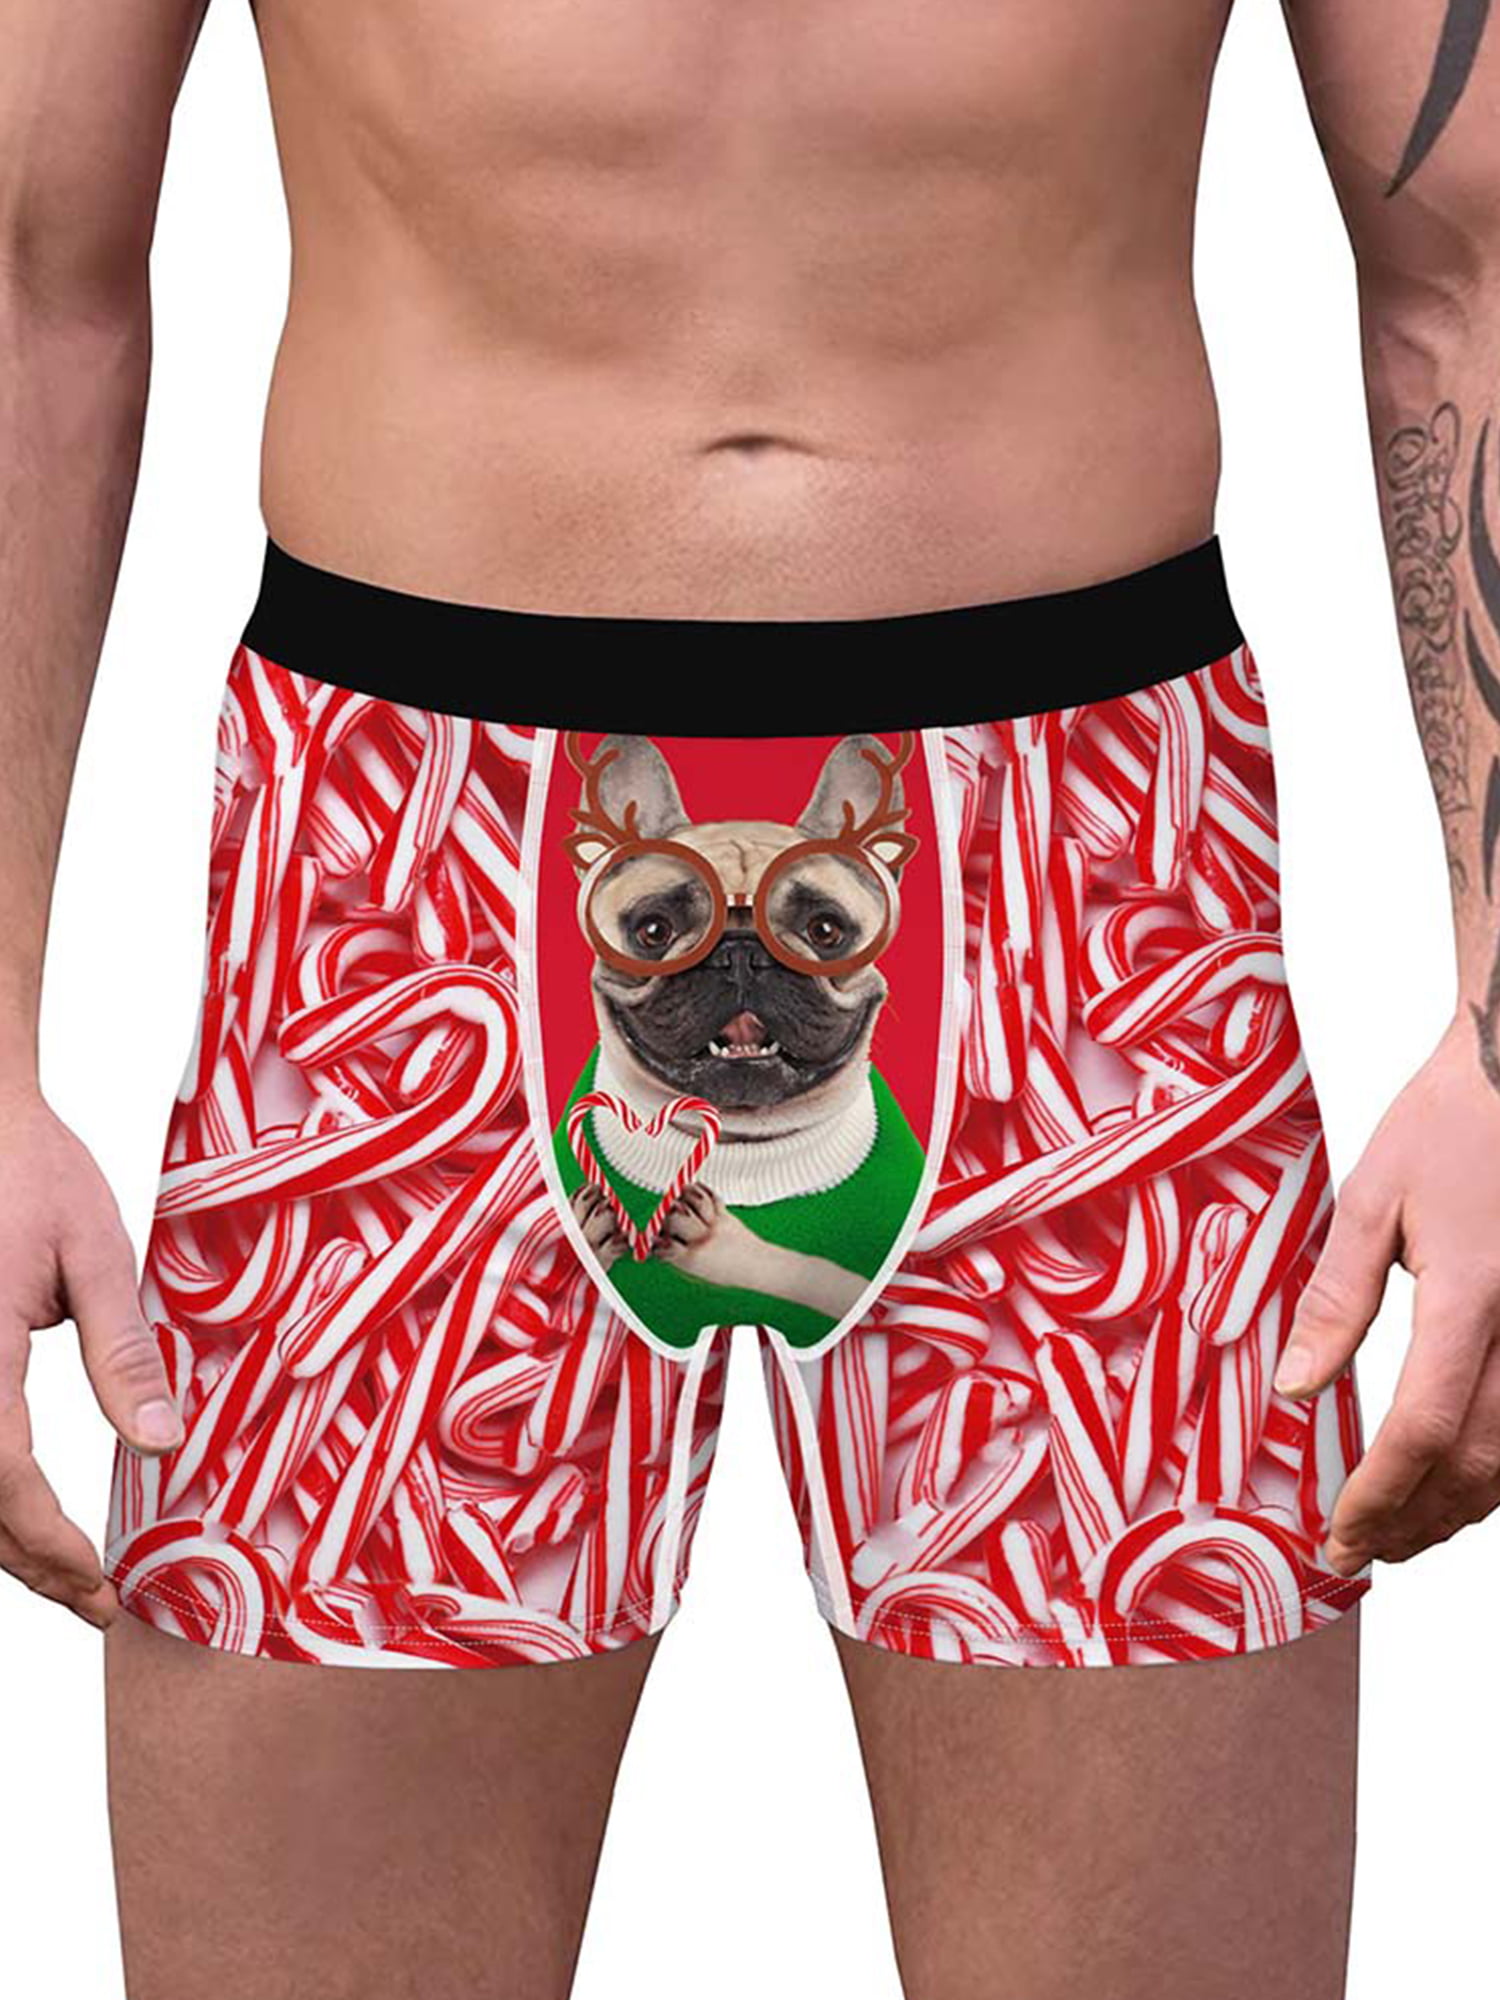 Brown Pattern with Sloth Boxer Briefs for Men Mens Comfortable Underwear